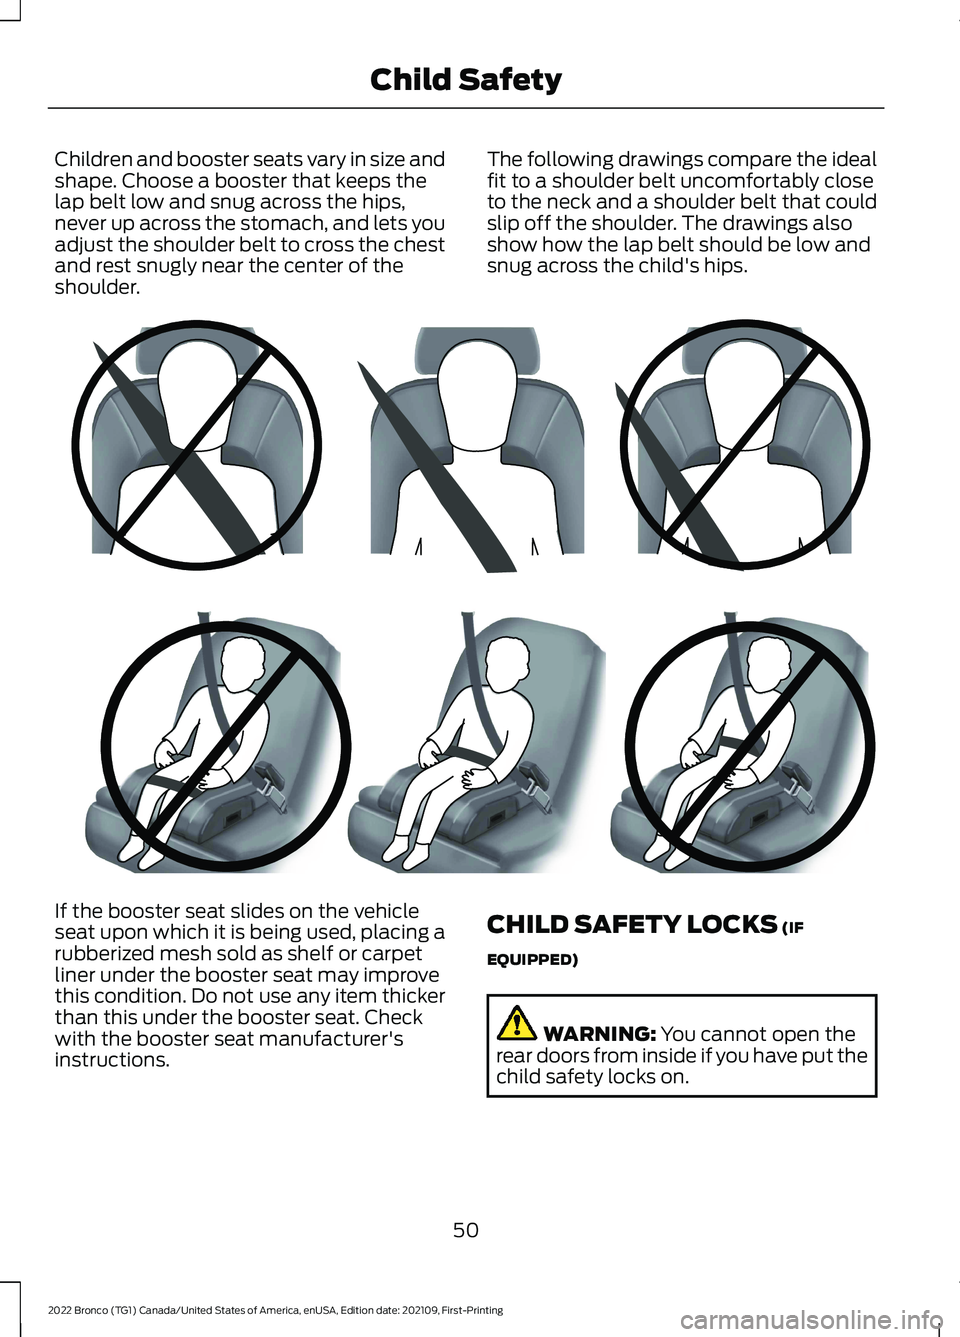 FORD BRONCO 2022  Owners Manual Children and booster seats vary in size andshape. Choose a booster that keeps thelap belt low and snug across the hips,never up across the stomach, and lets youadjust the shoulder belt to cross the ch